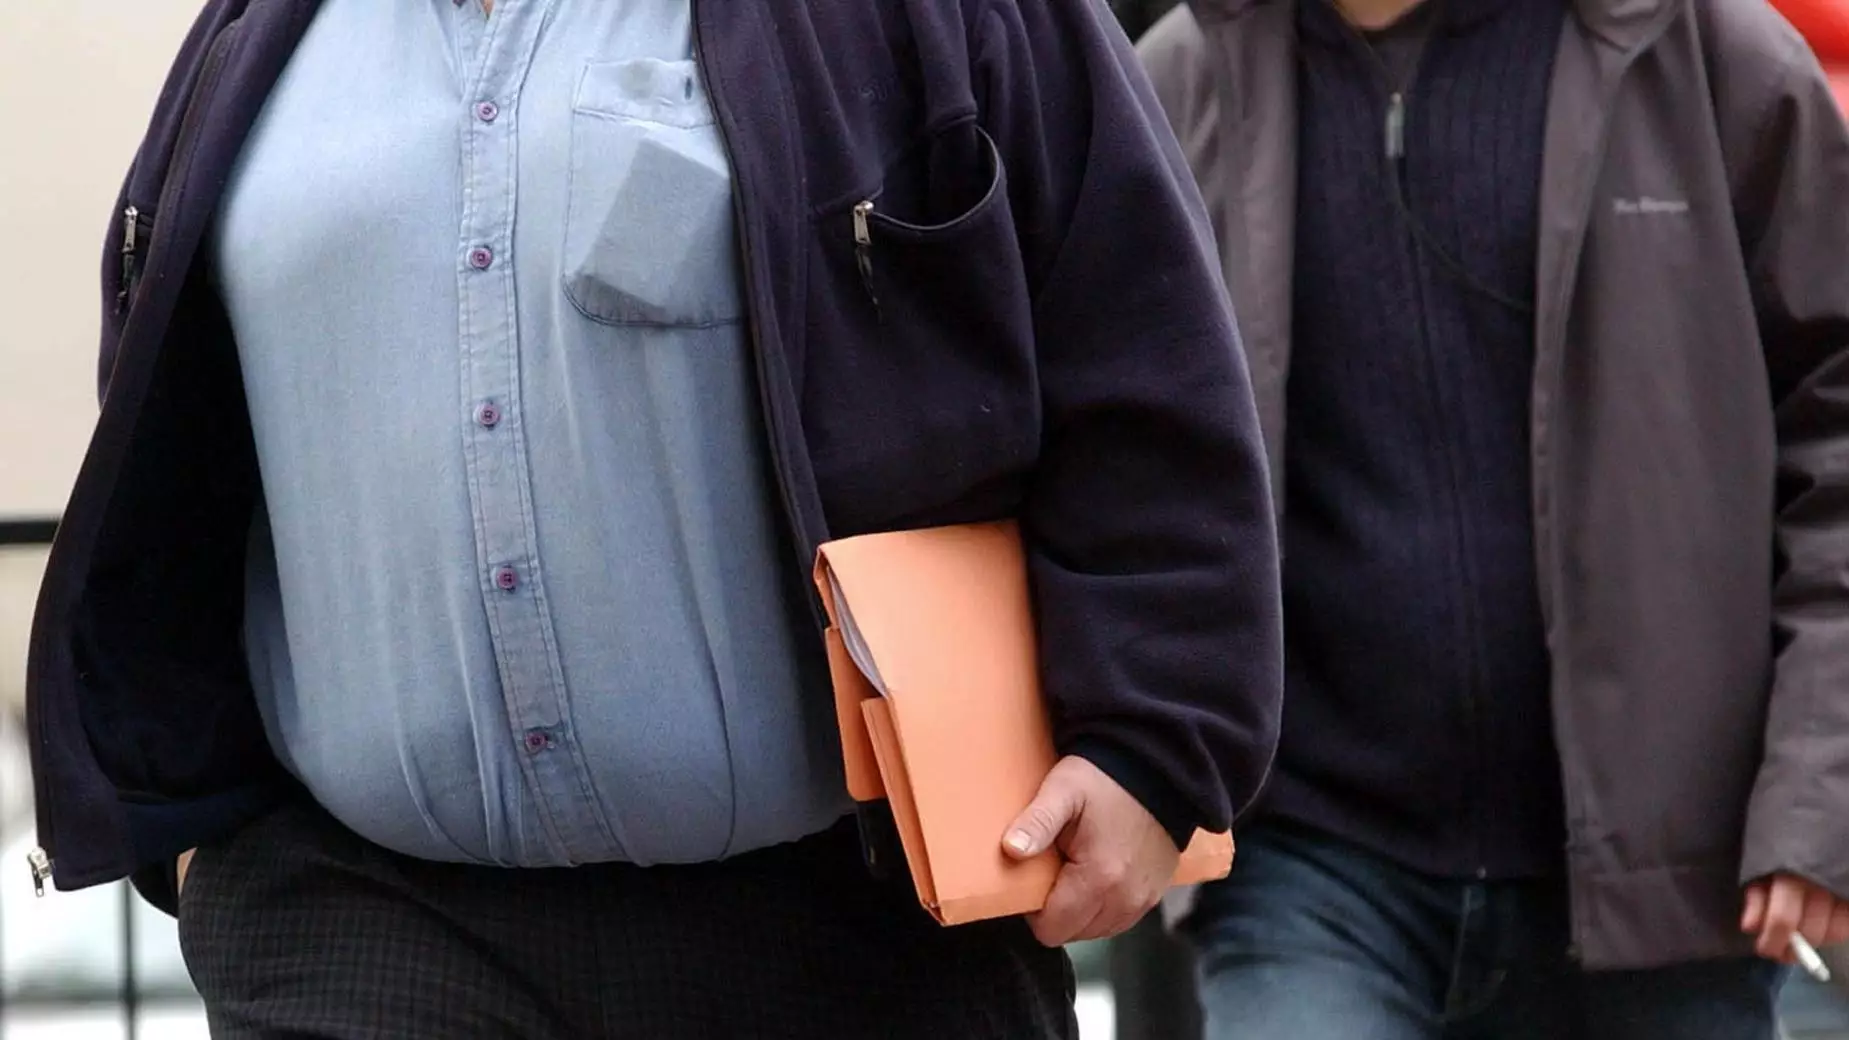 Study Finds Obese People Could Be 90 Percent More Likely To Die From Covid-19